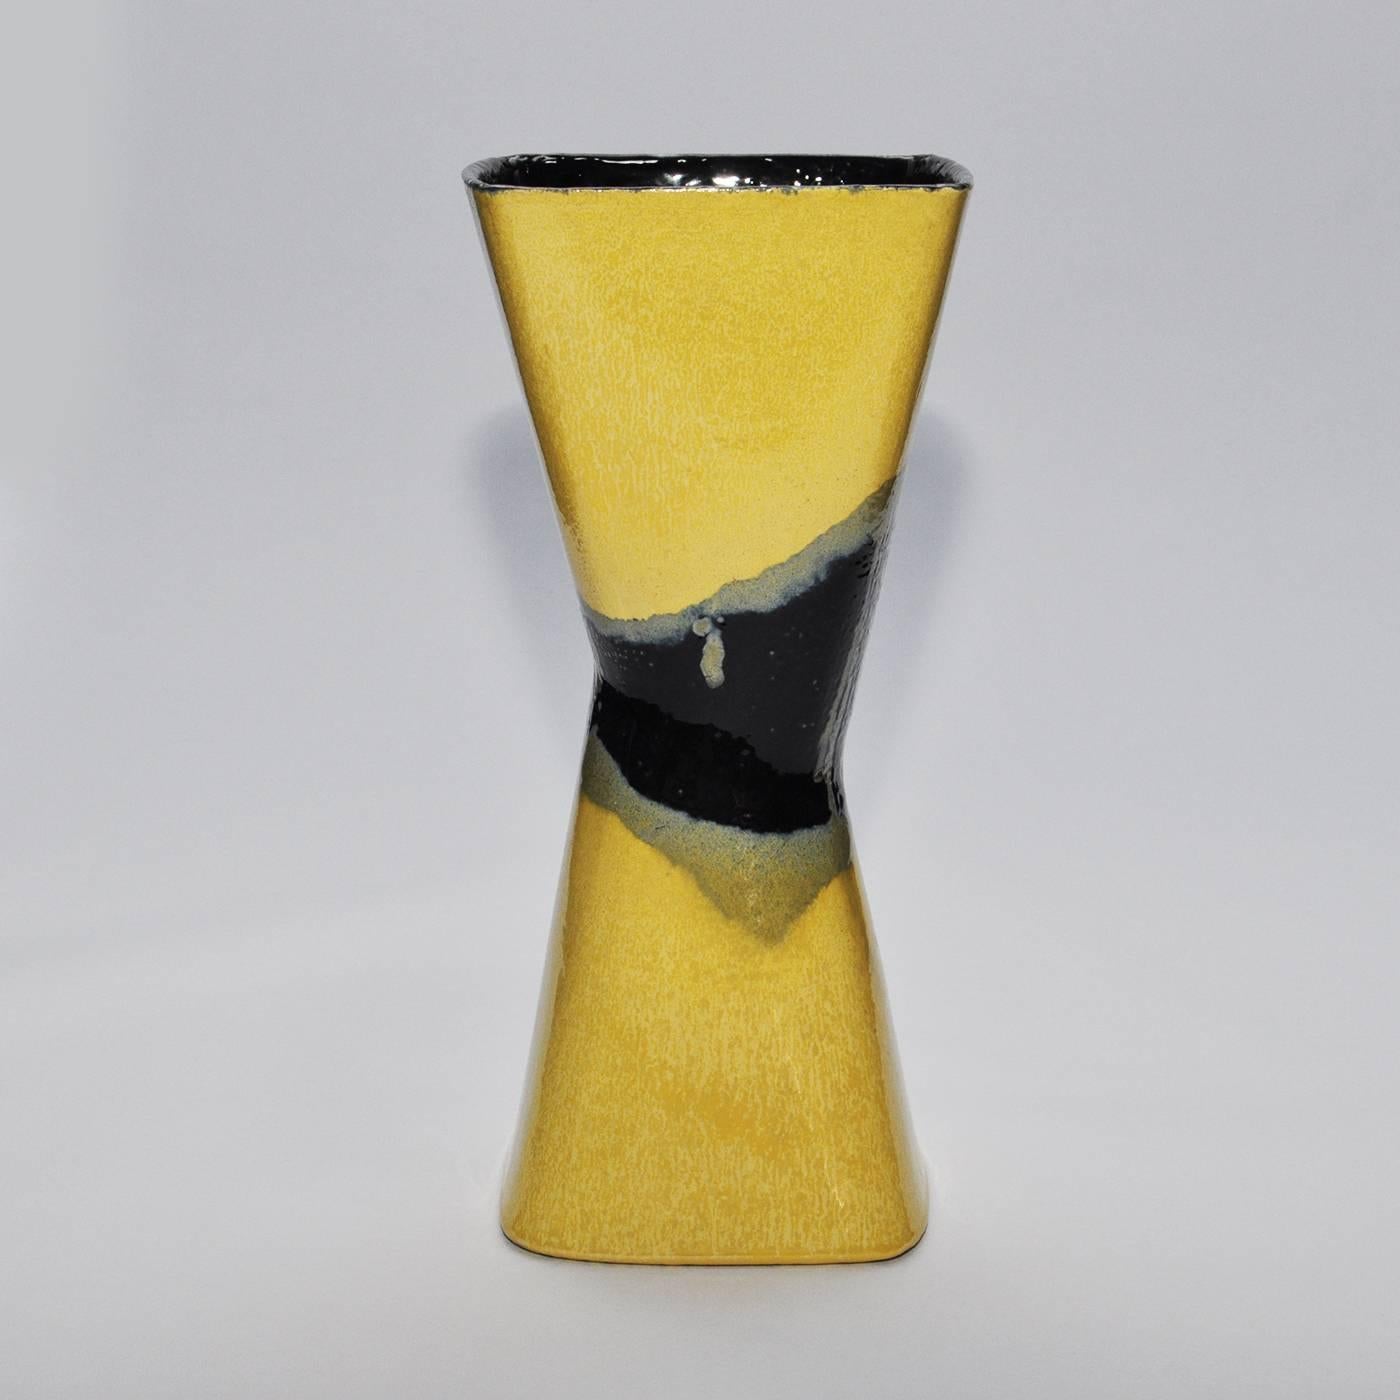 This superb vase by designer Mauro Fabbro is a study in simplicity with its stylized hourglass profile mixed with bold colors. The broadening diagonal movement starting at the center is reminiscent of the struggle of transformation that inspires the